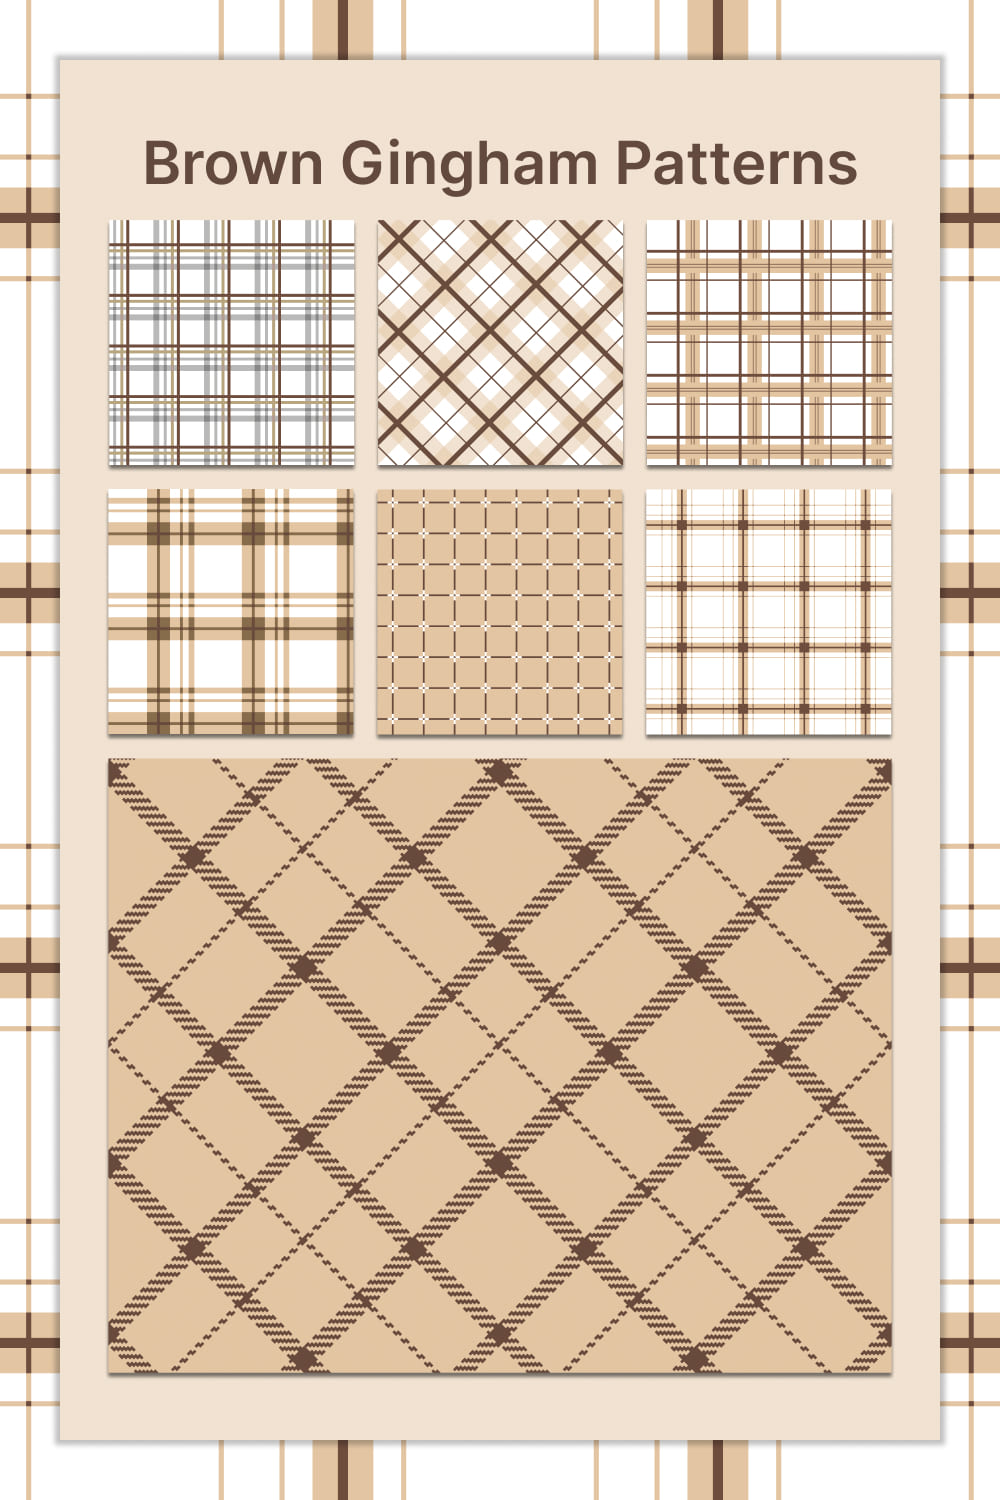 Brown pattern with beige gingham prints.